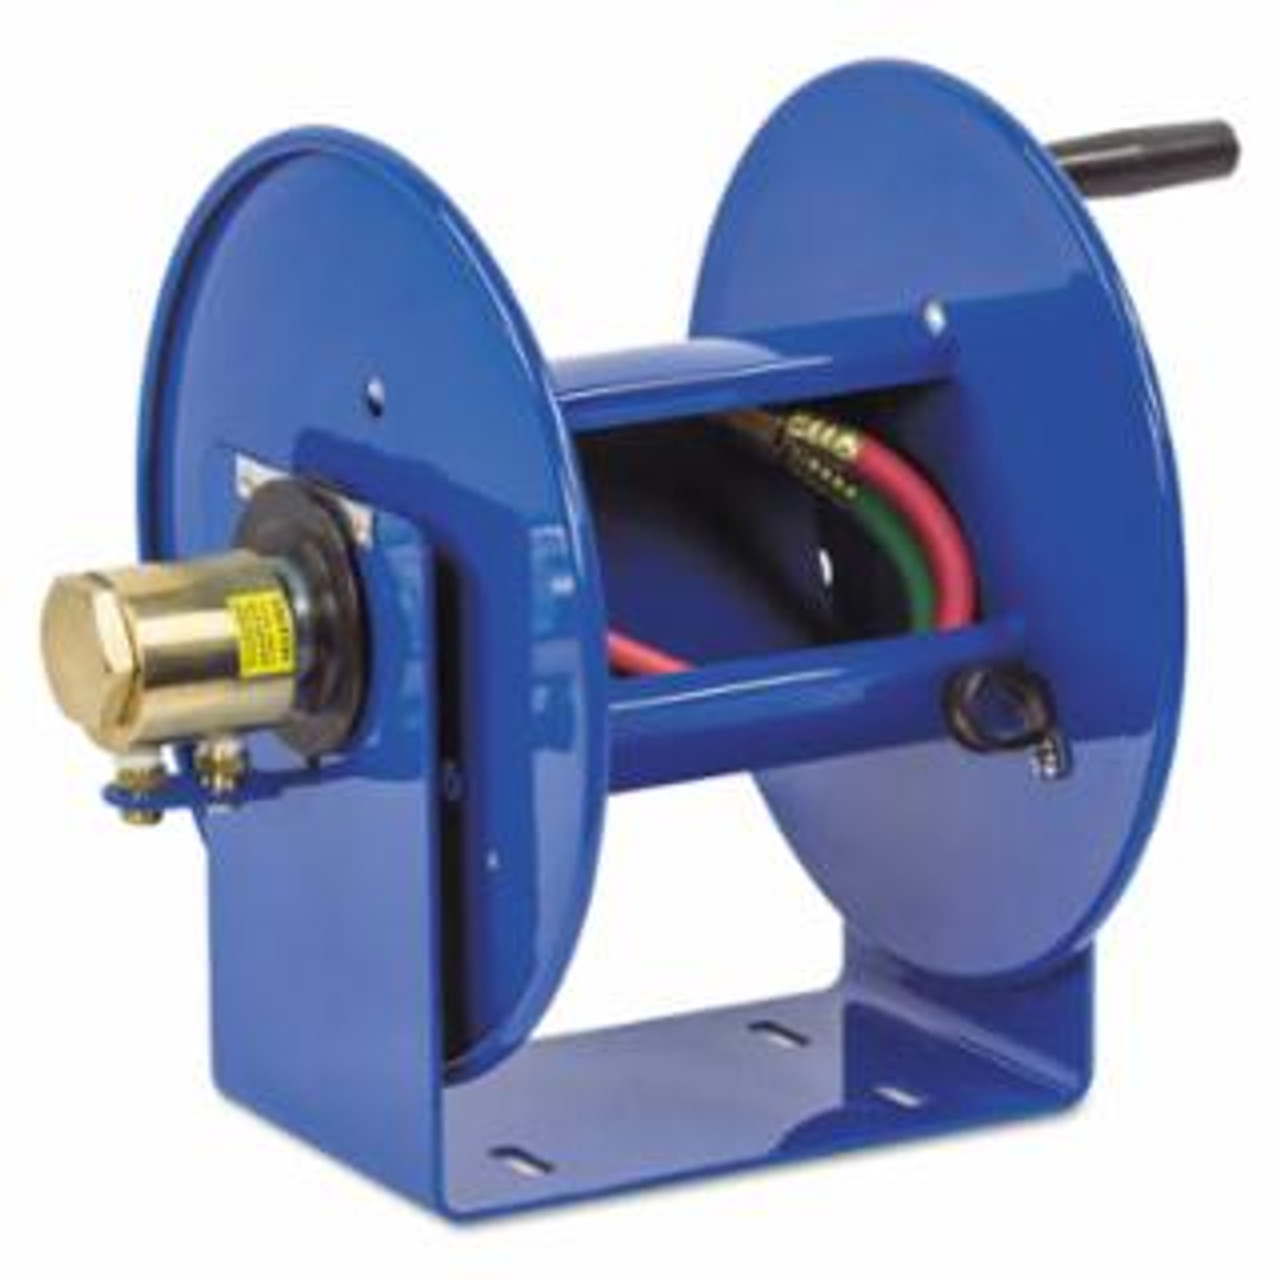 Coxreels Hand Crank Welding Cable Reel for arc Welding: Holds up